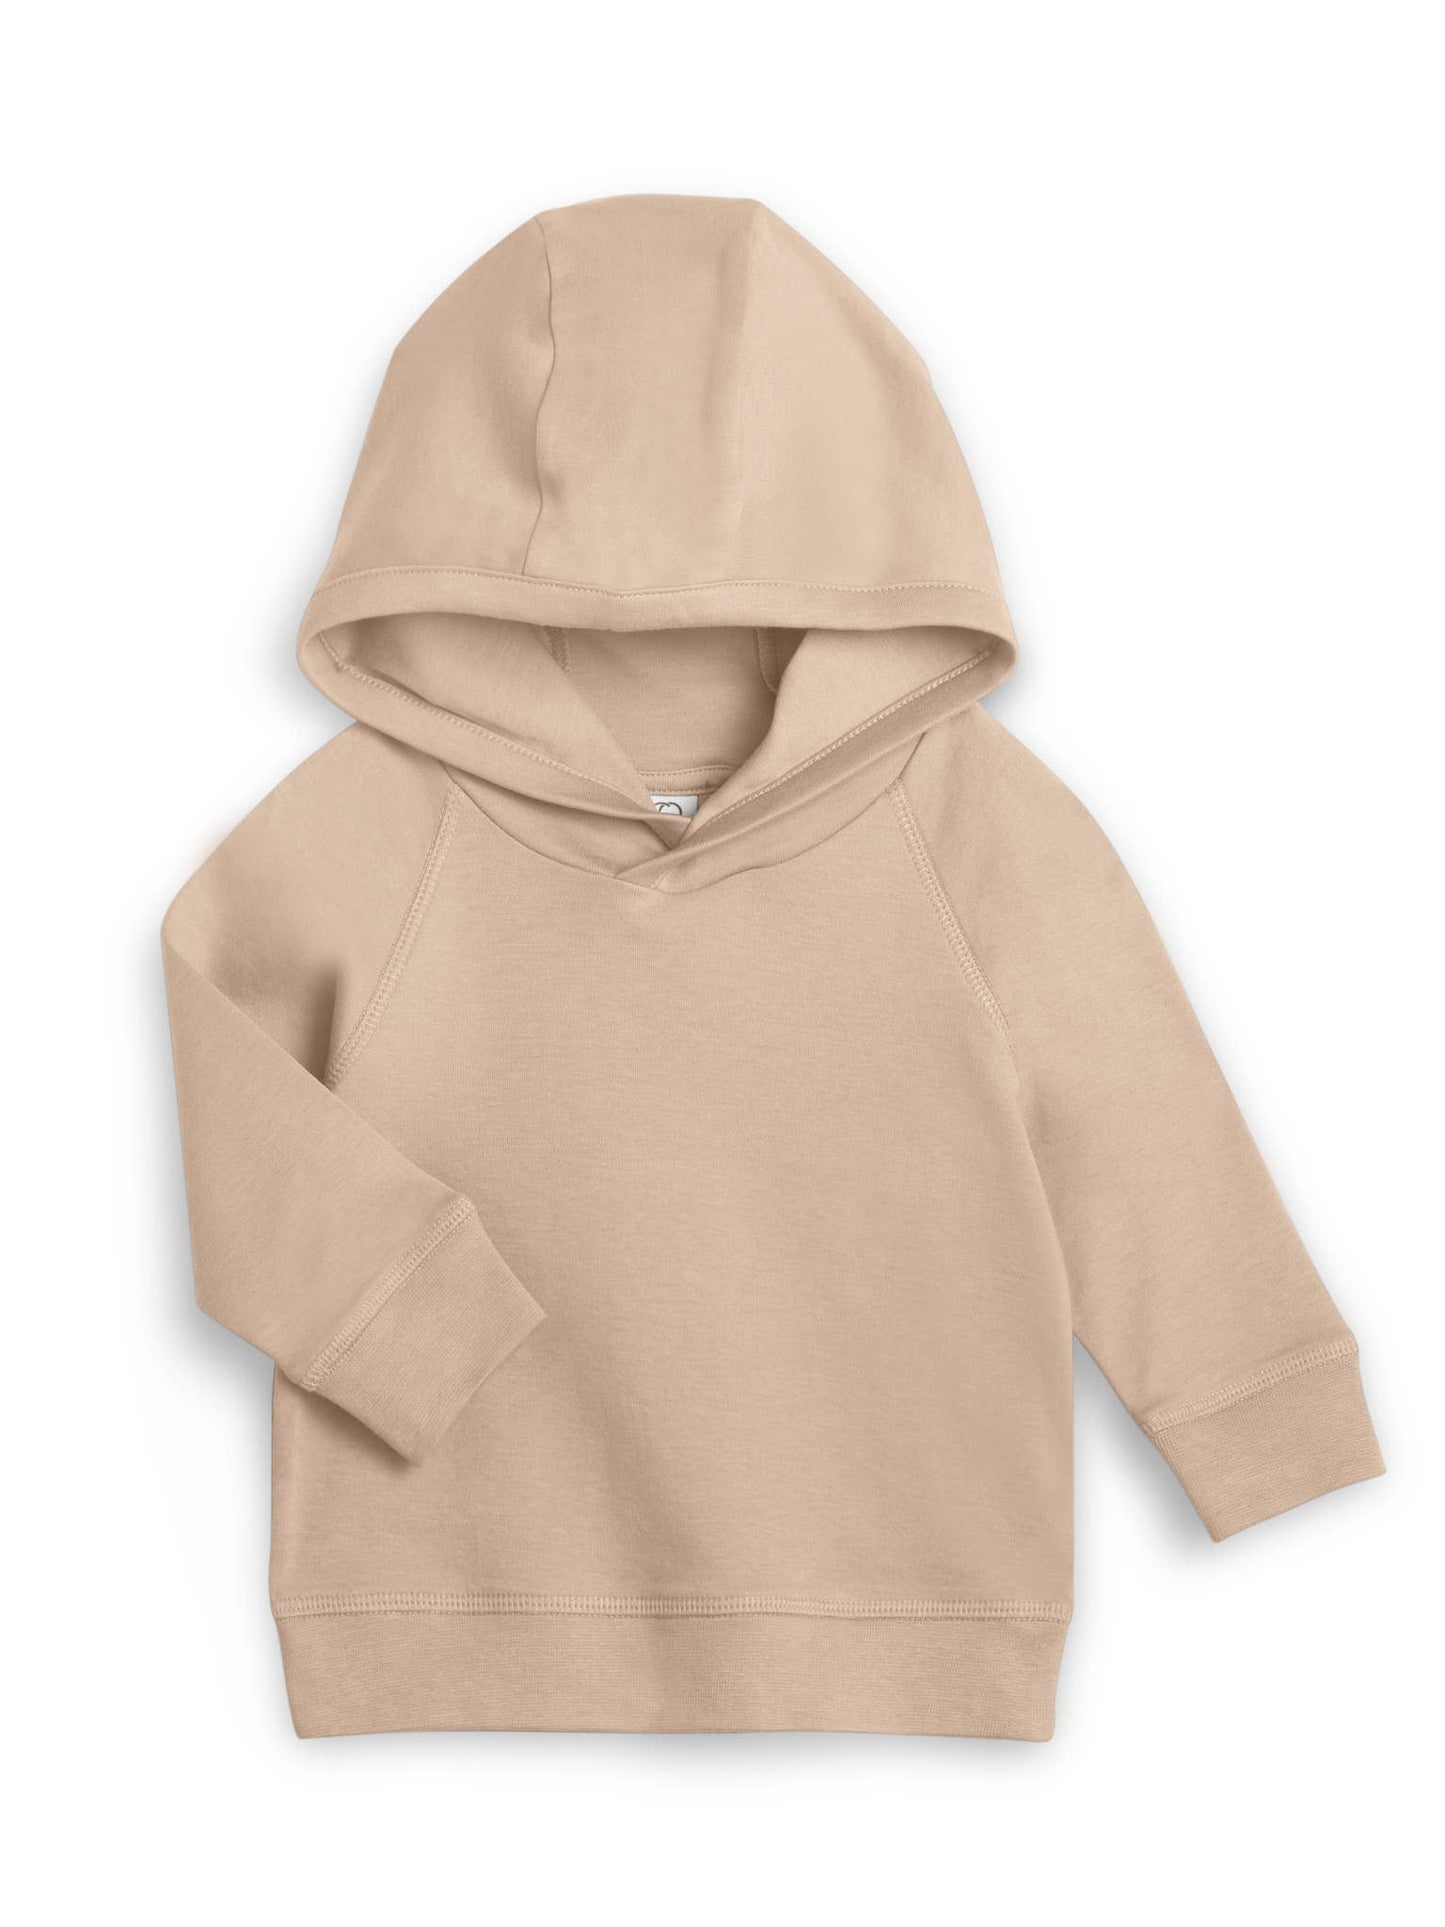 Colored Organics - Organic Baby and Kids Madison Hooded Pullover - Clay